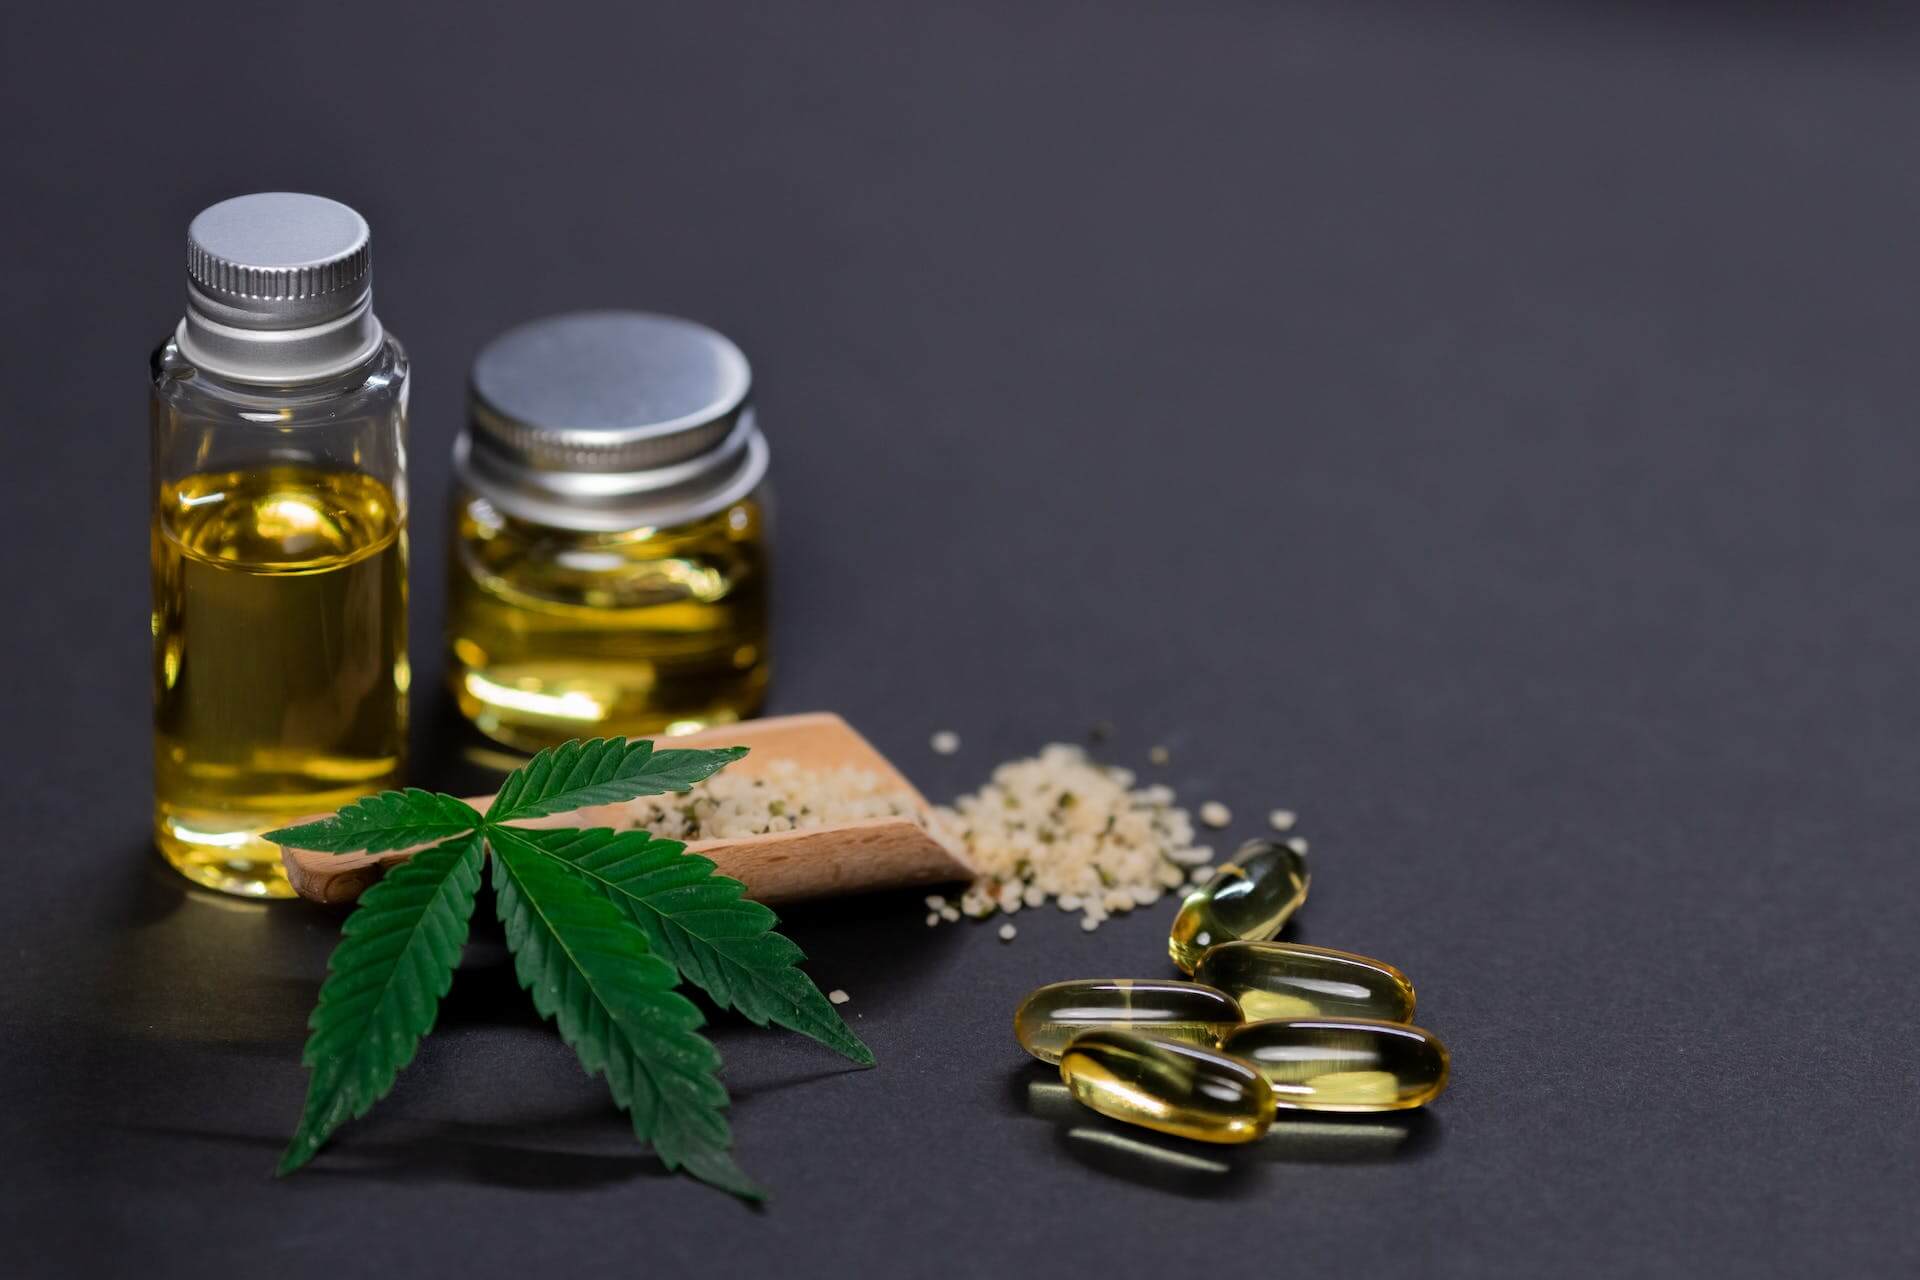 A range of products offered through CBD merchant services.